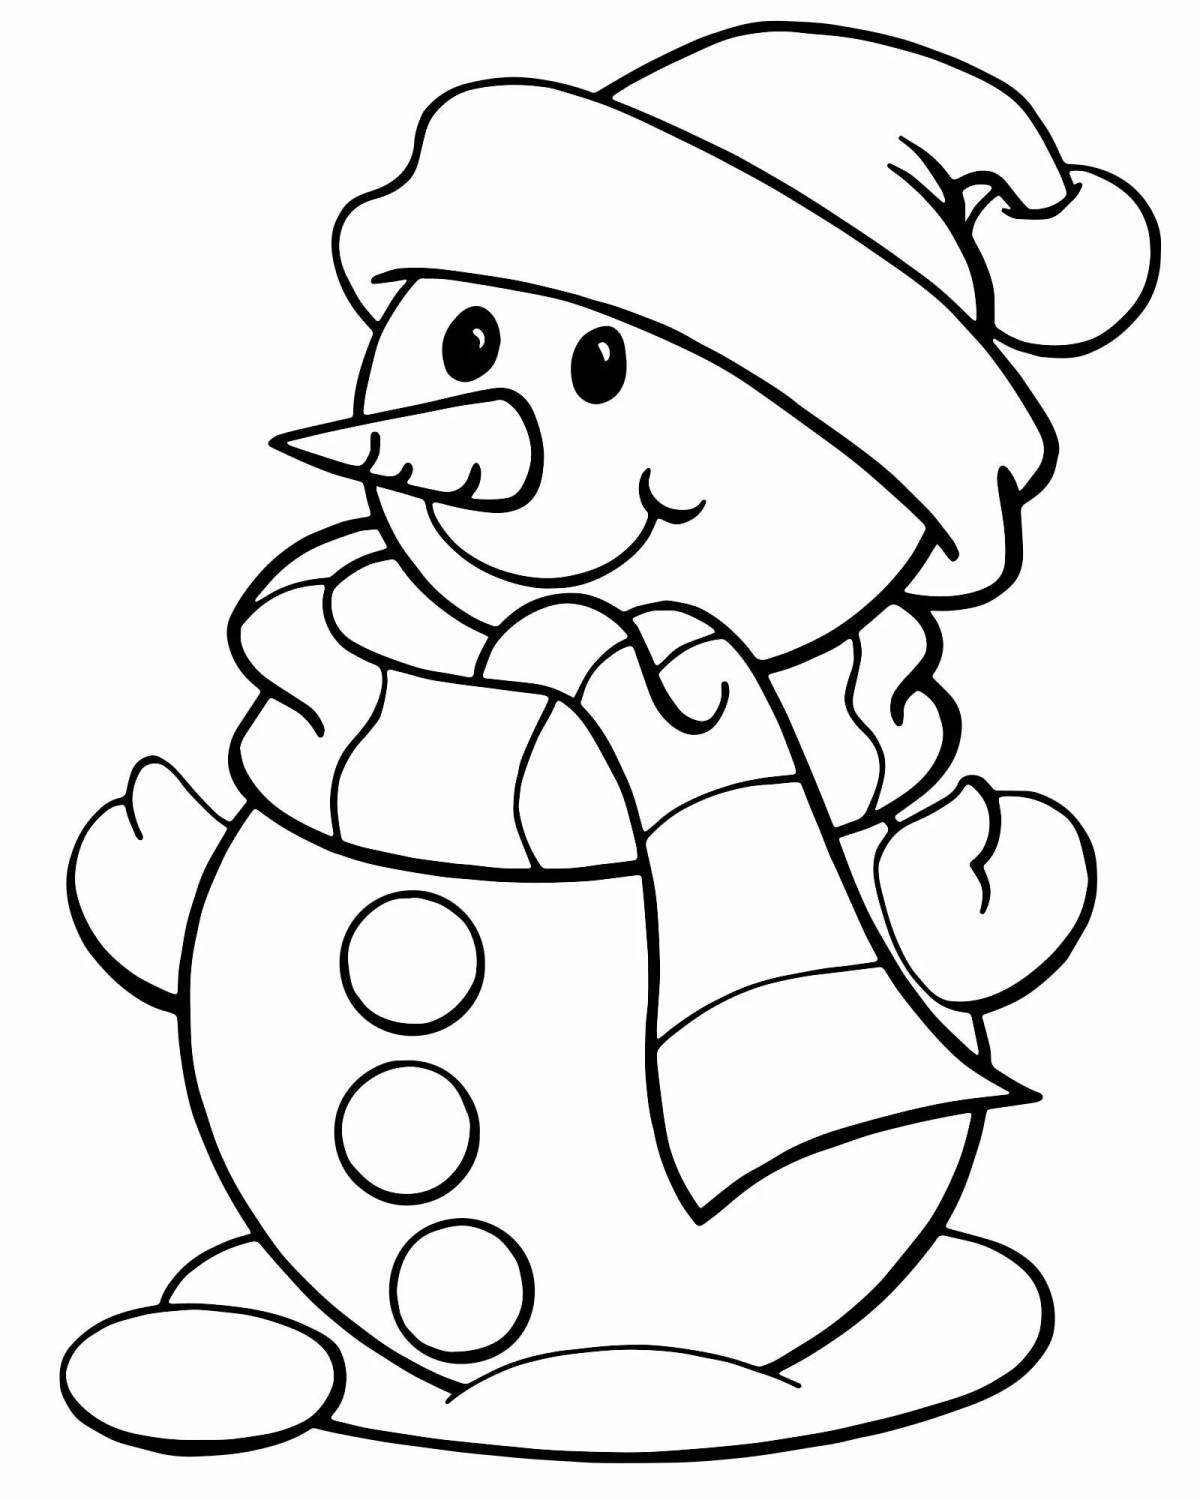 Animated snowman coloring for kids 5 6